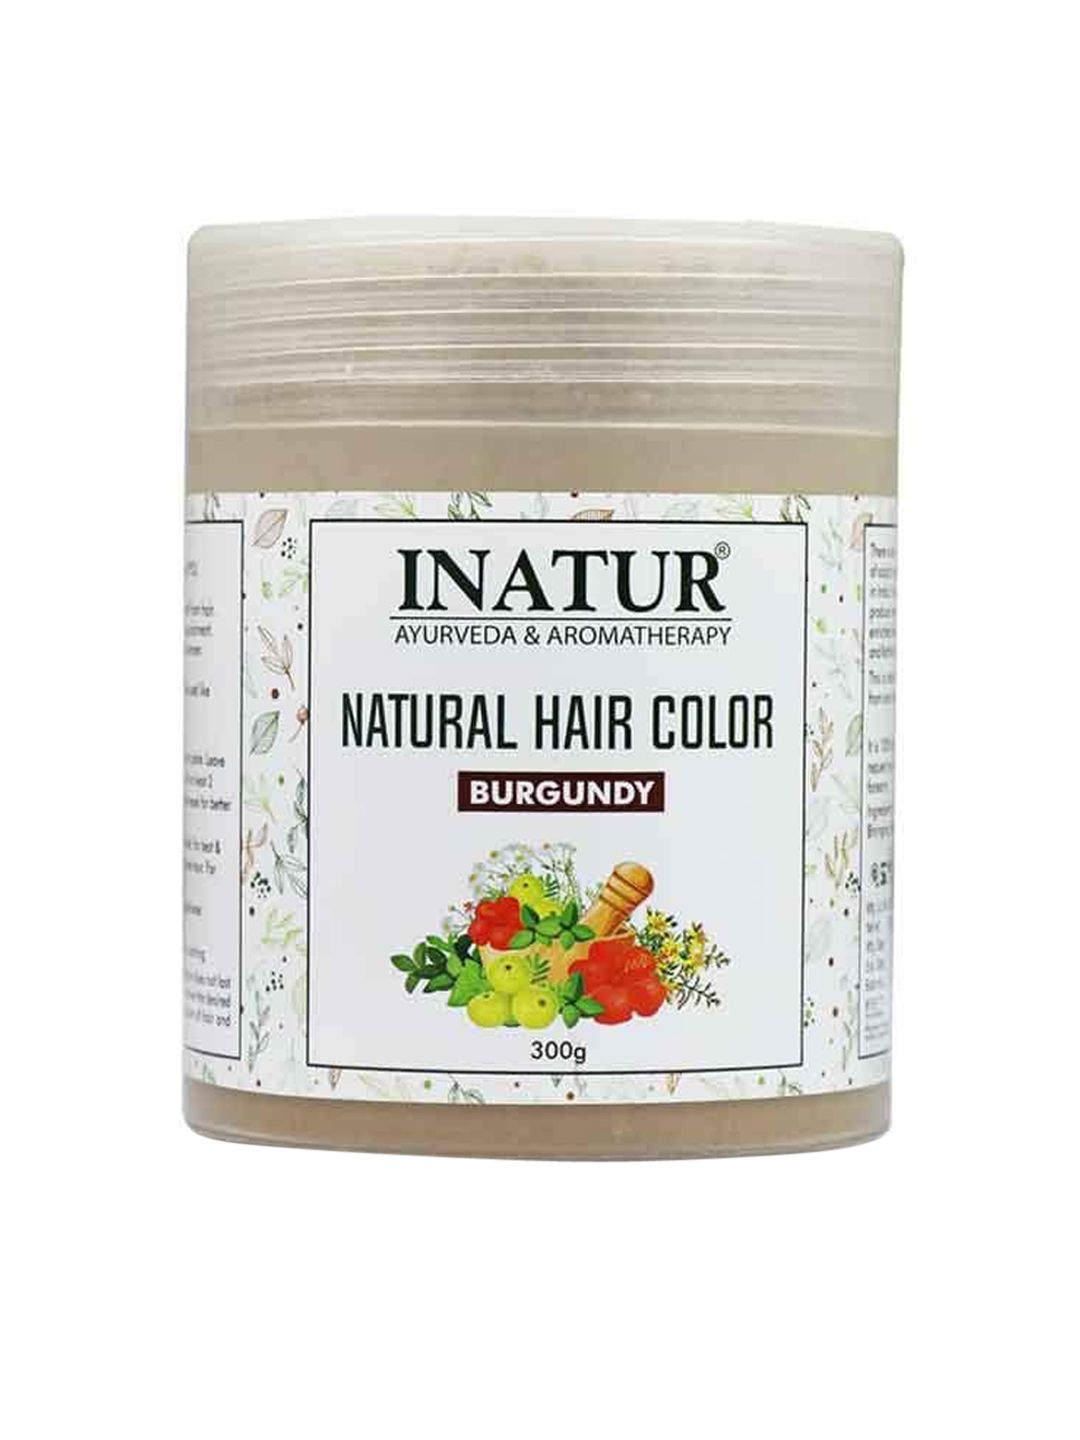 Inatur Natural Hair Color 300 g - Burgundy Price in India